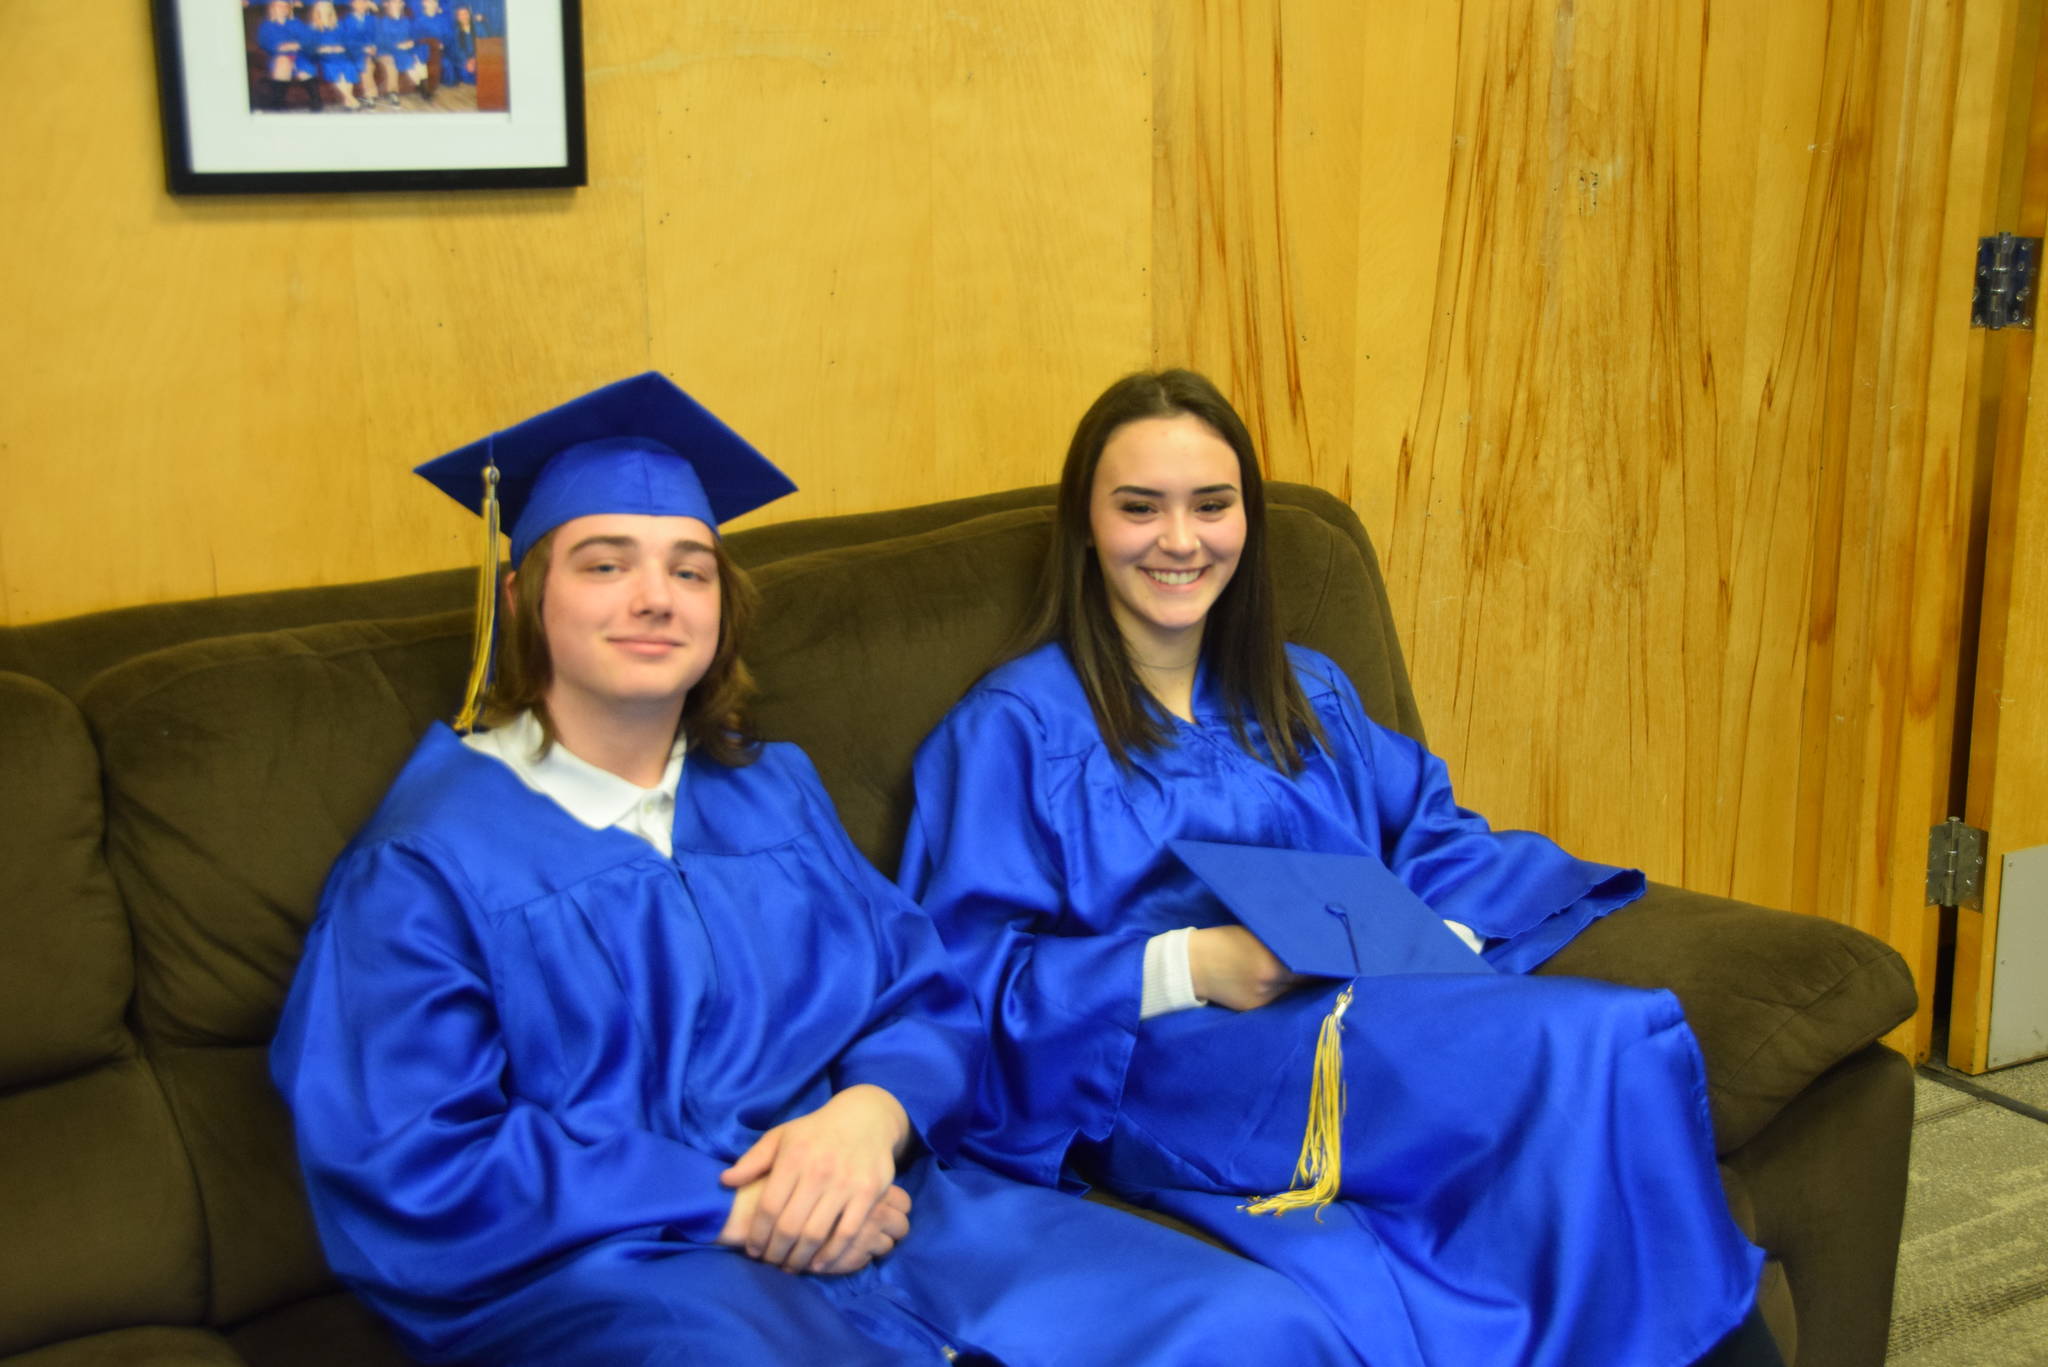 Titan Griffin, left, and Nereid Phillips, right, smile for the camera during the Kenai Alternative High School 2019 graduation in Kenai, Alaska on May 22, 2019. (Photo by Brian Mazurek/Peninsula Clarion)